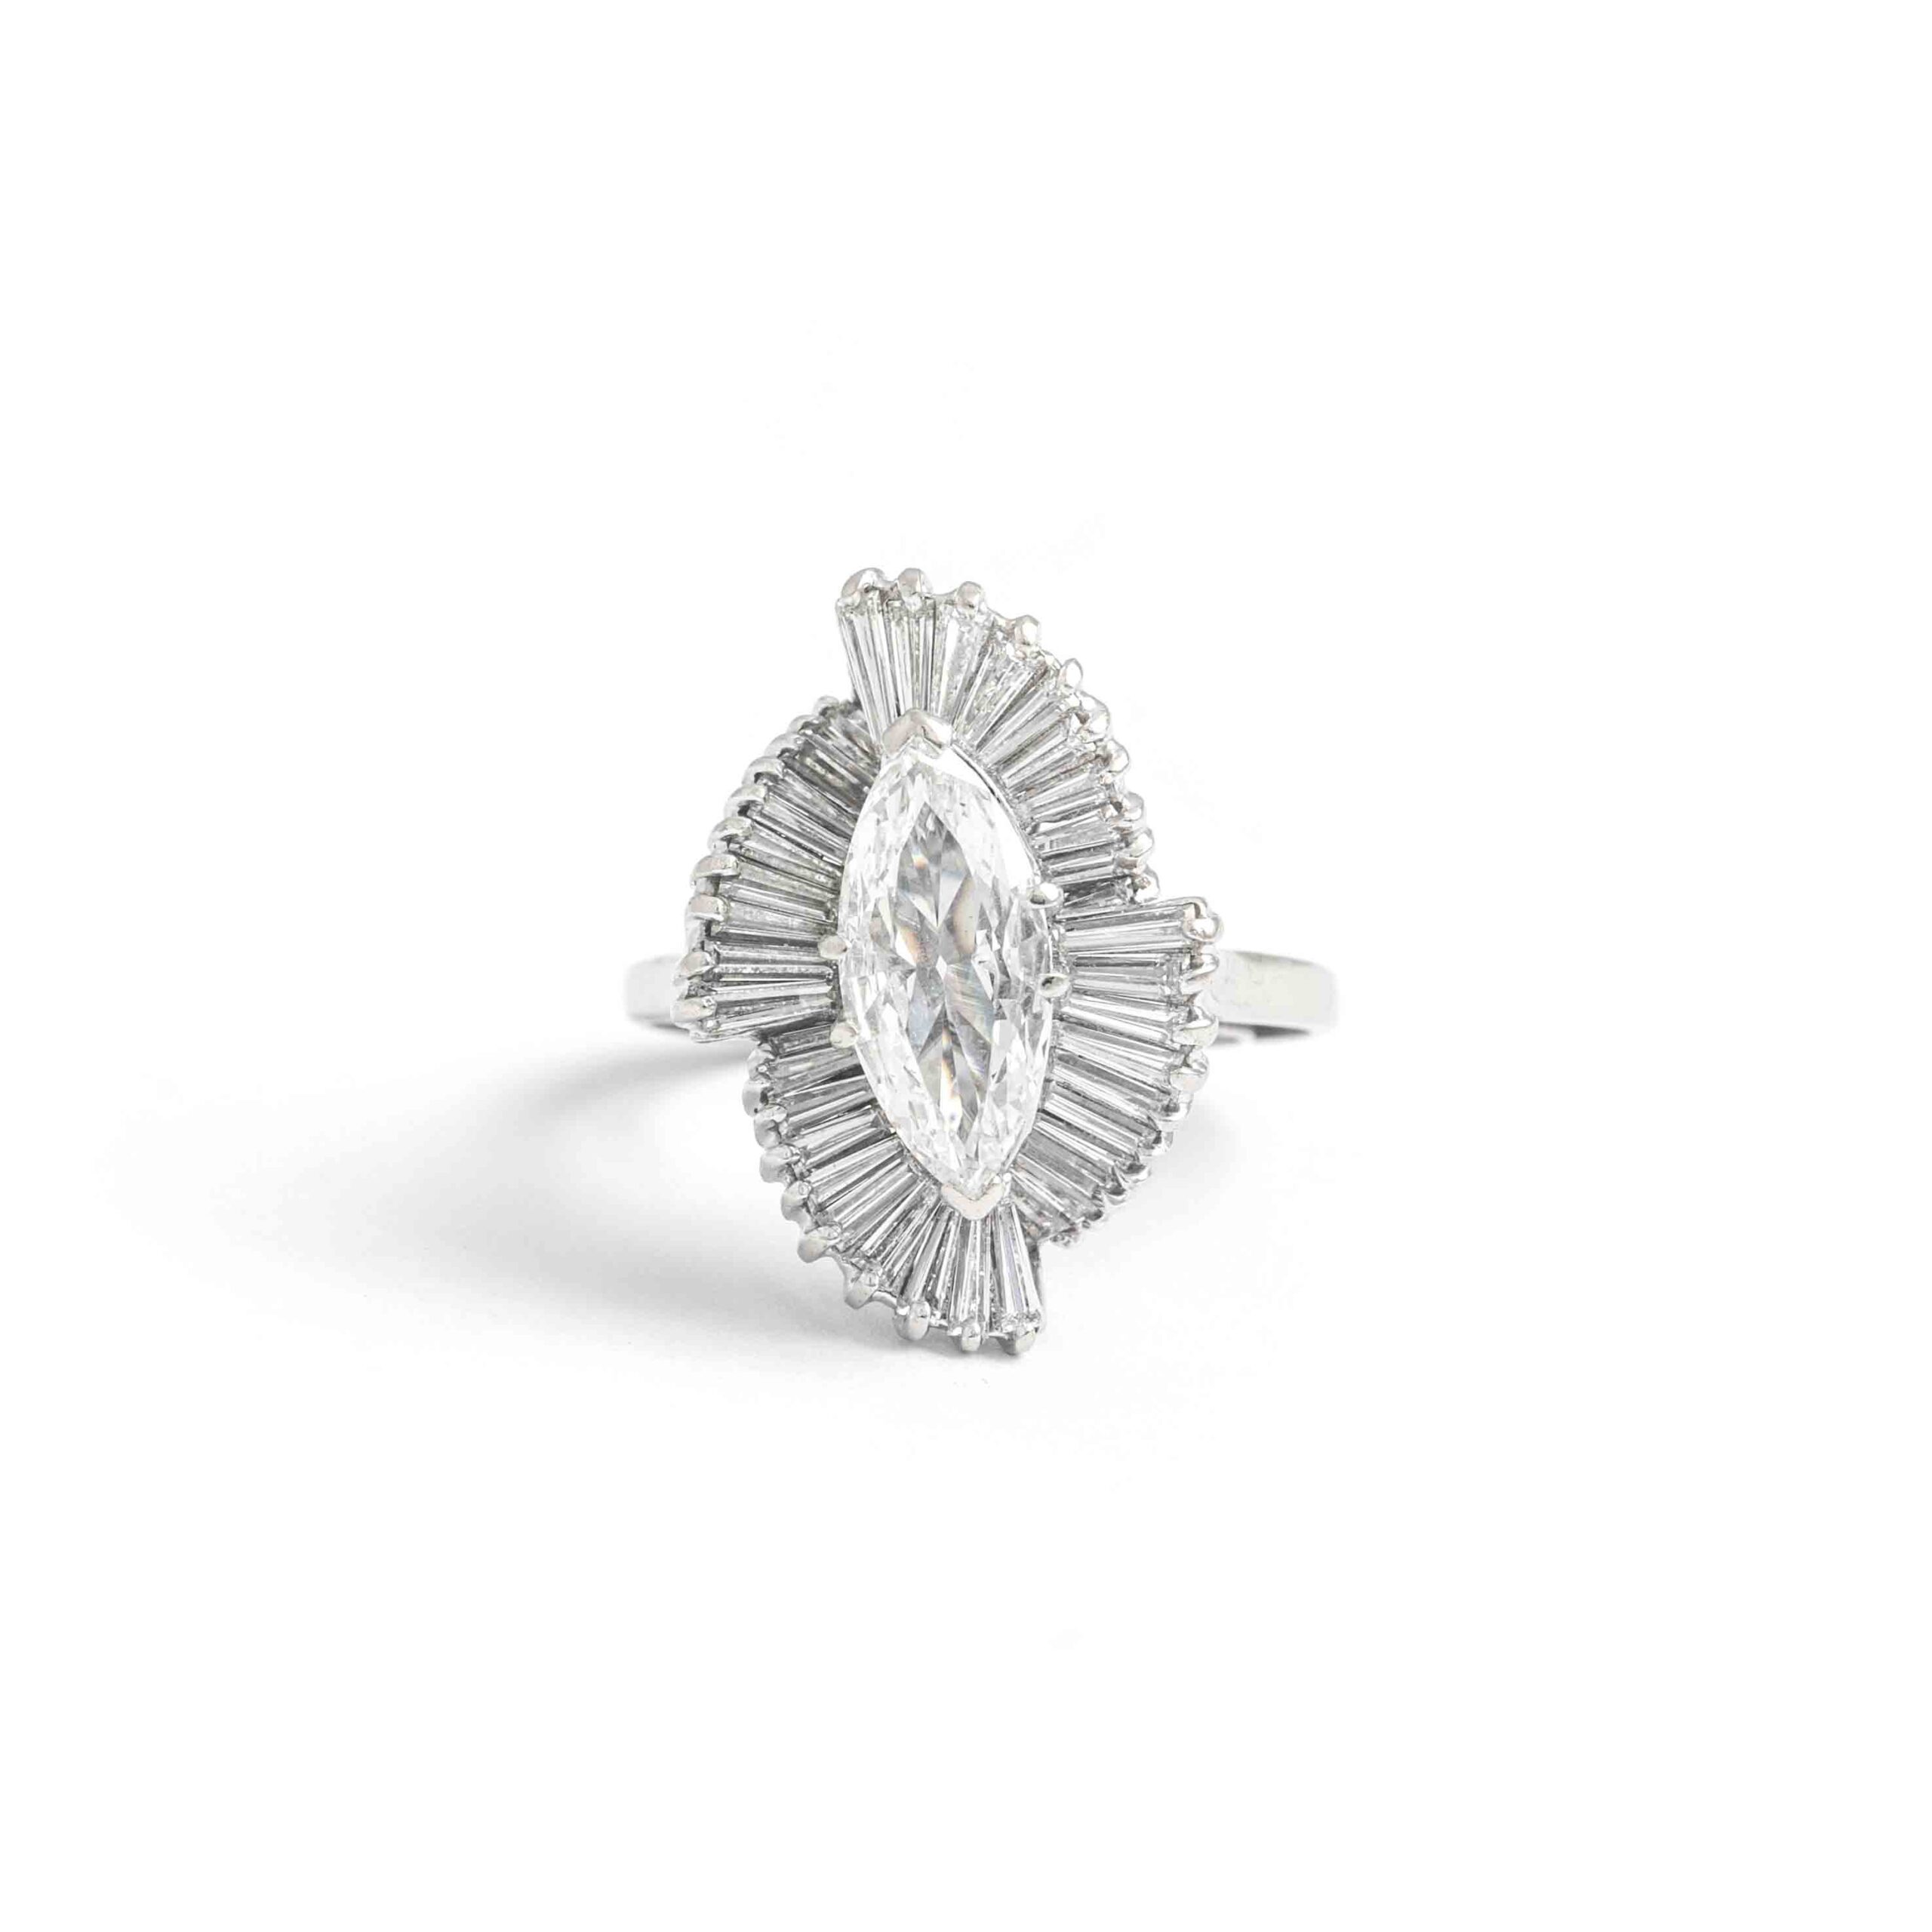 1.38 Carat Marquise Diamond White Gold 14K Ring. The central marquise Diamond weights 1.38 carat, F color and Si2 clarity, No fluorescence surrounded by baguette cut diamond. Circa 1950.